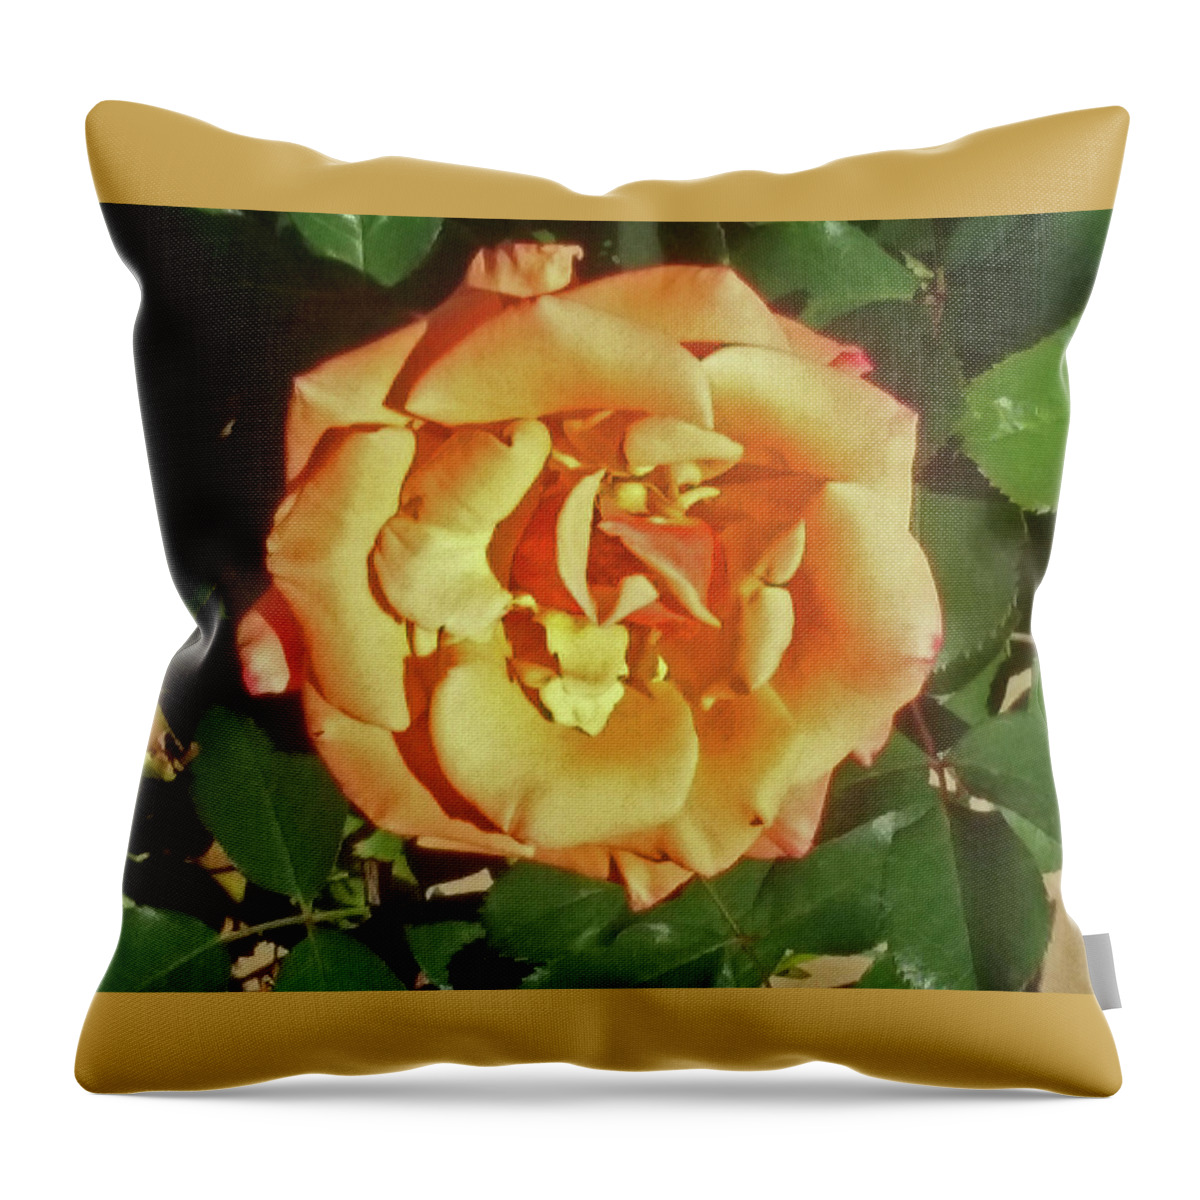 Flower Throw Pillow featuring the photograph Buttercream Rose For Your Valentine by Jay Milo